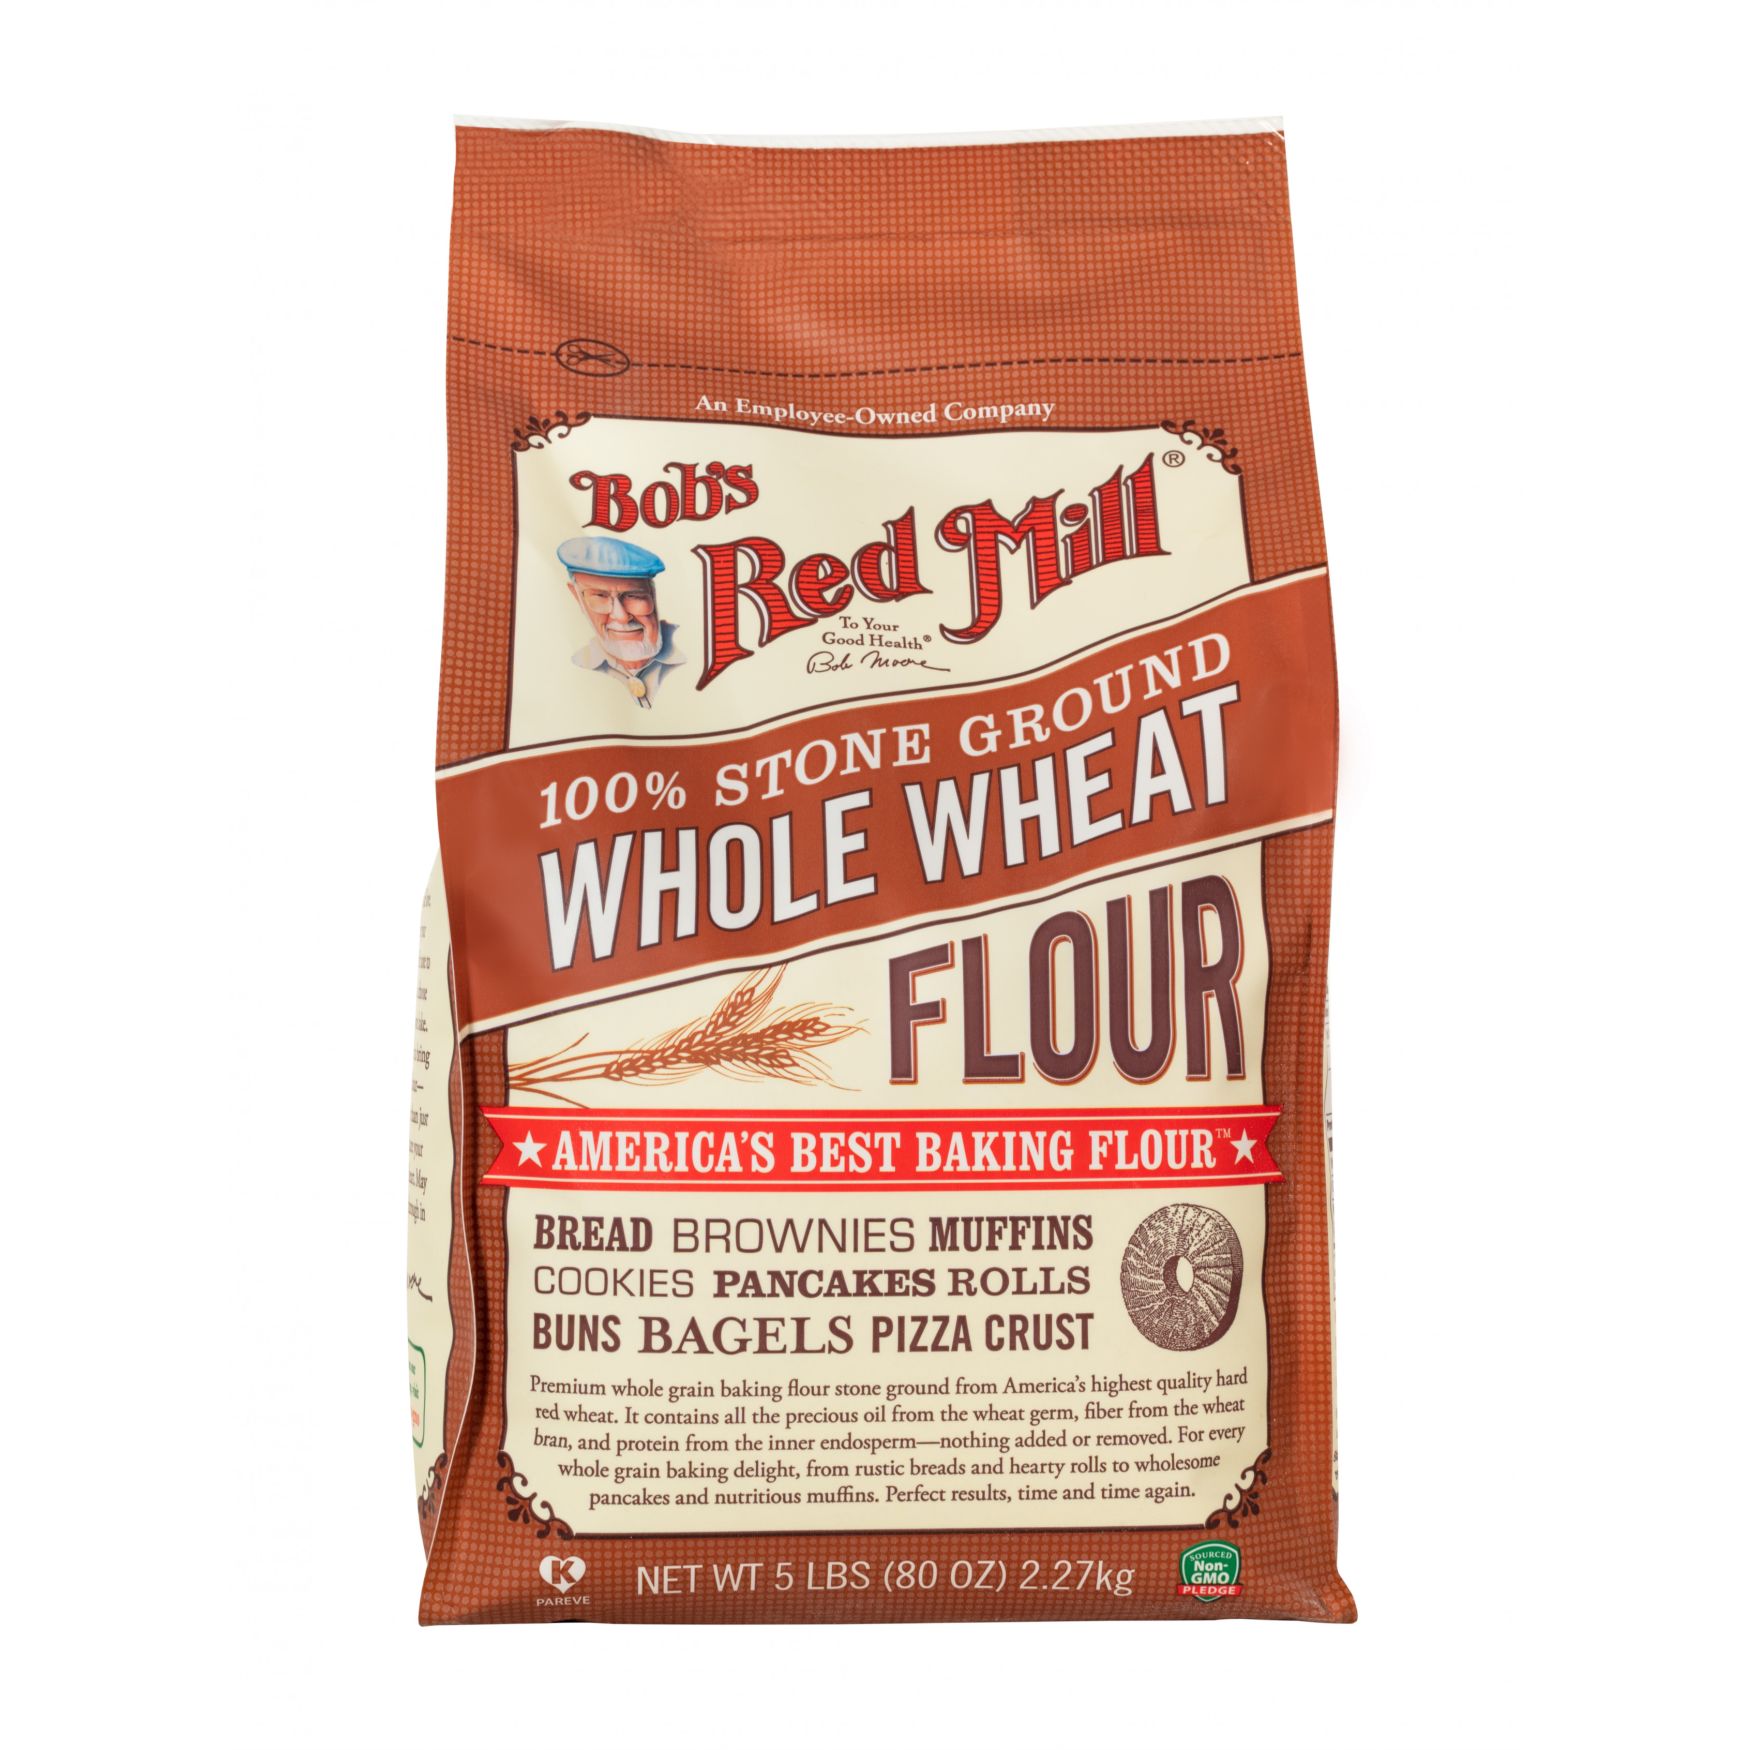 Bobs Red Mill Whole Wheat Flour